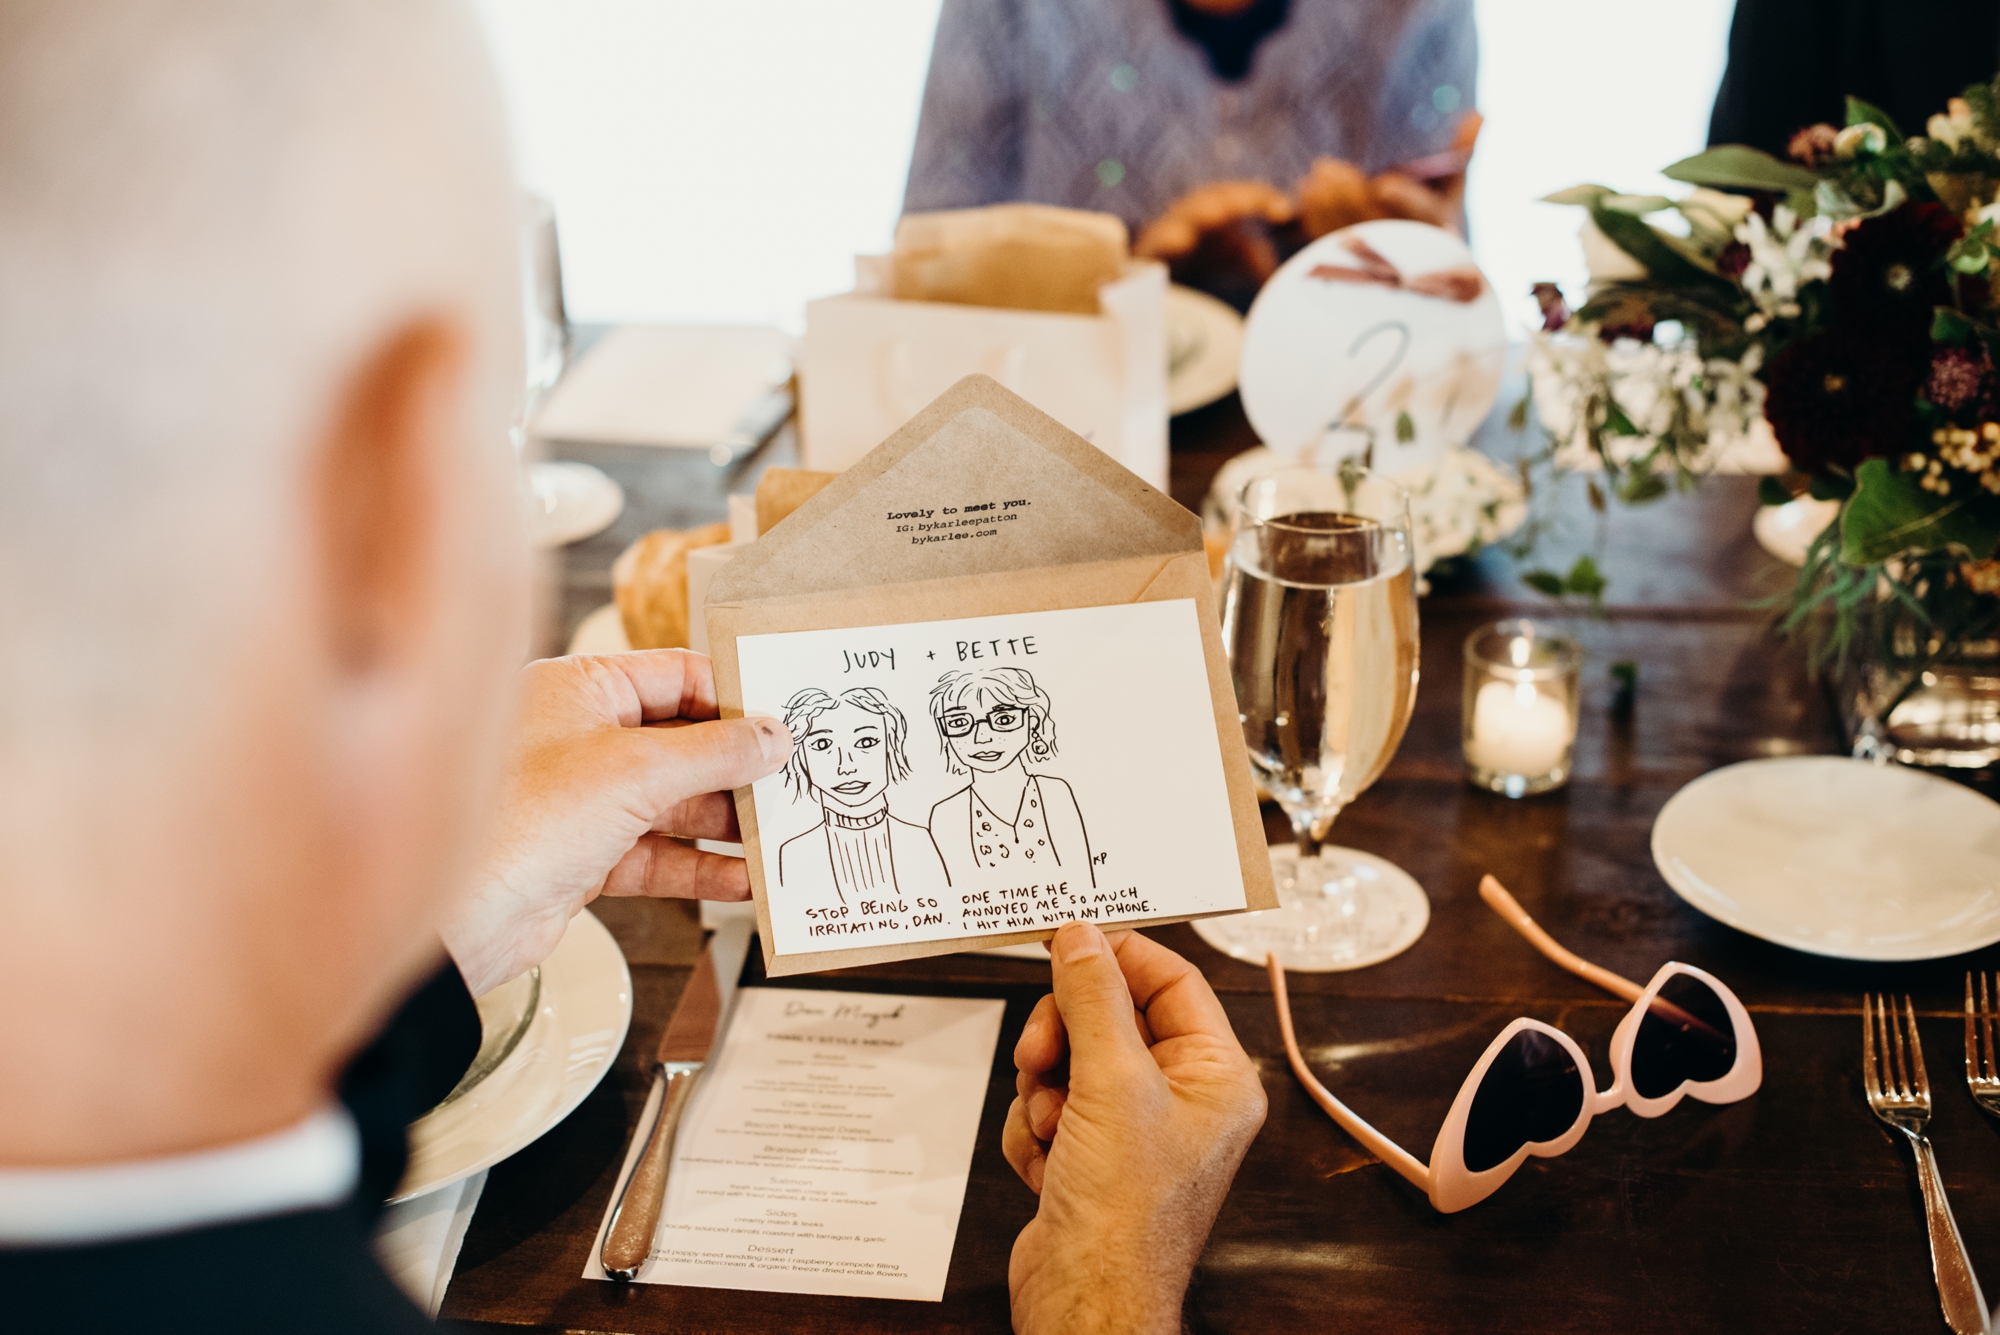 The groom admires an illustrated portrait of his sisters. Bad Portraits by Karlee Patton